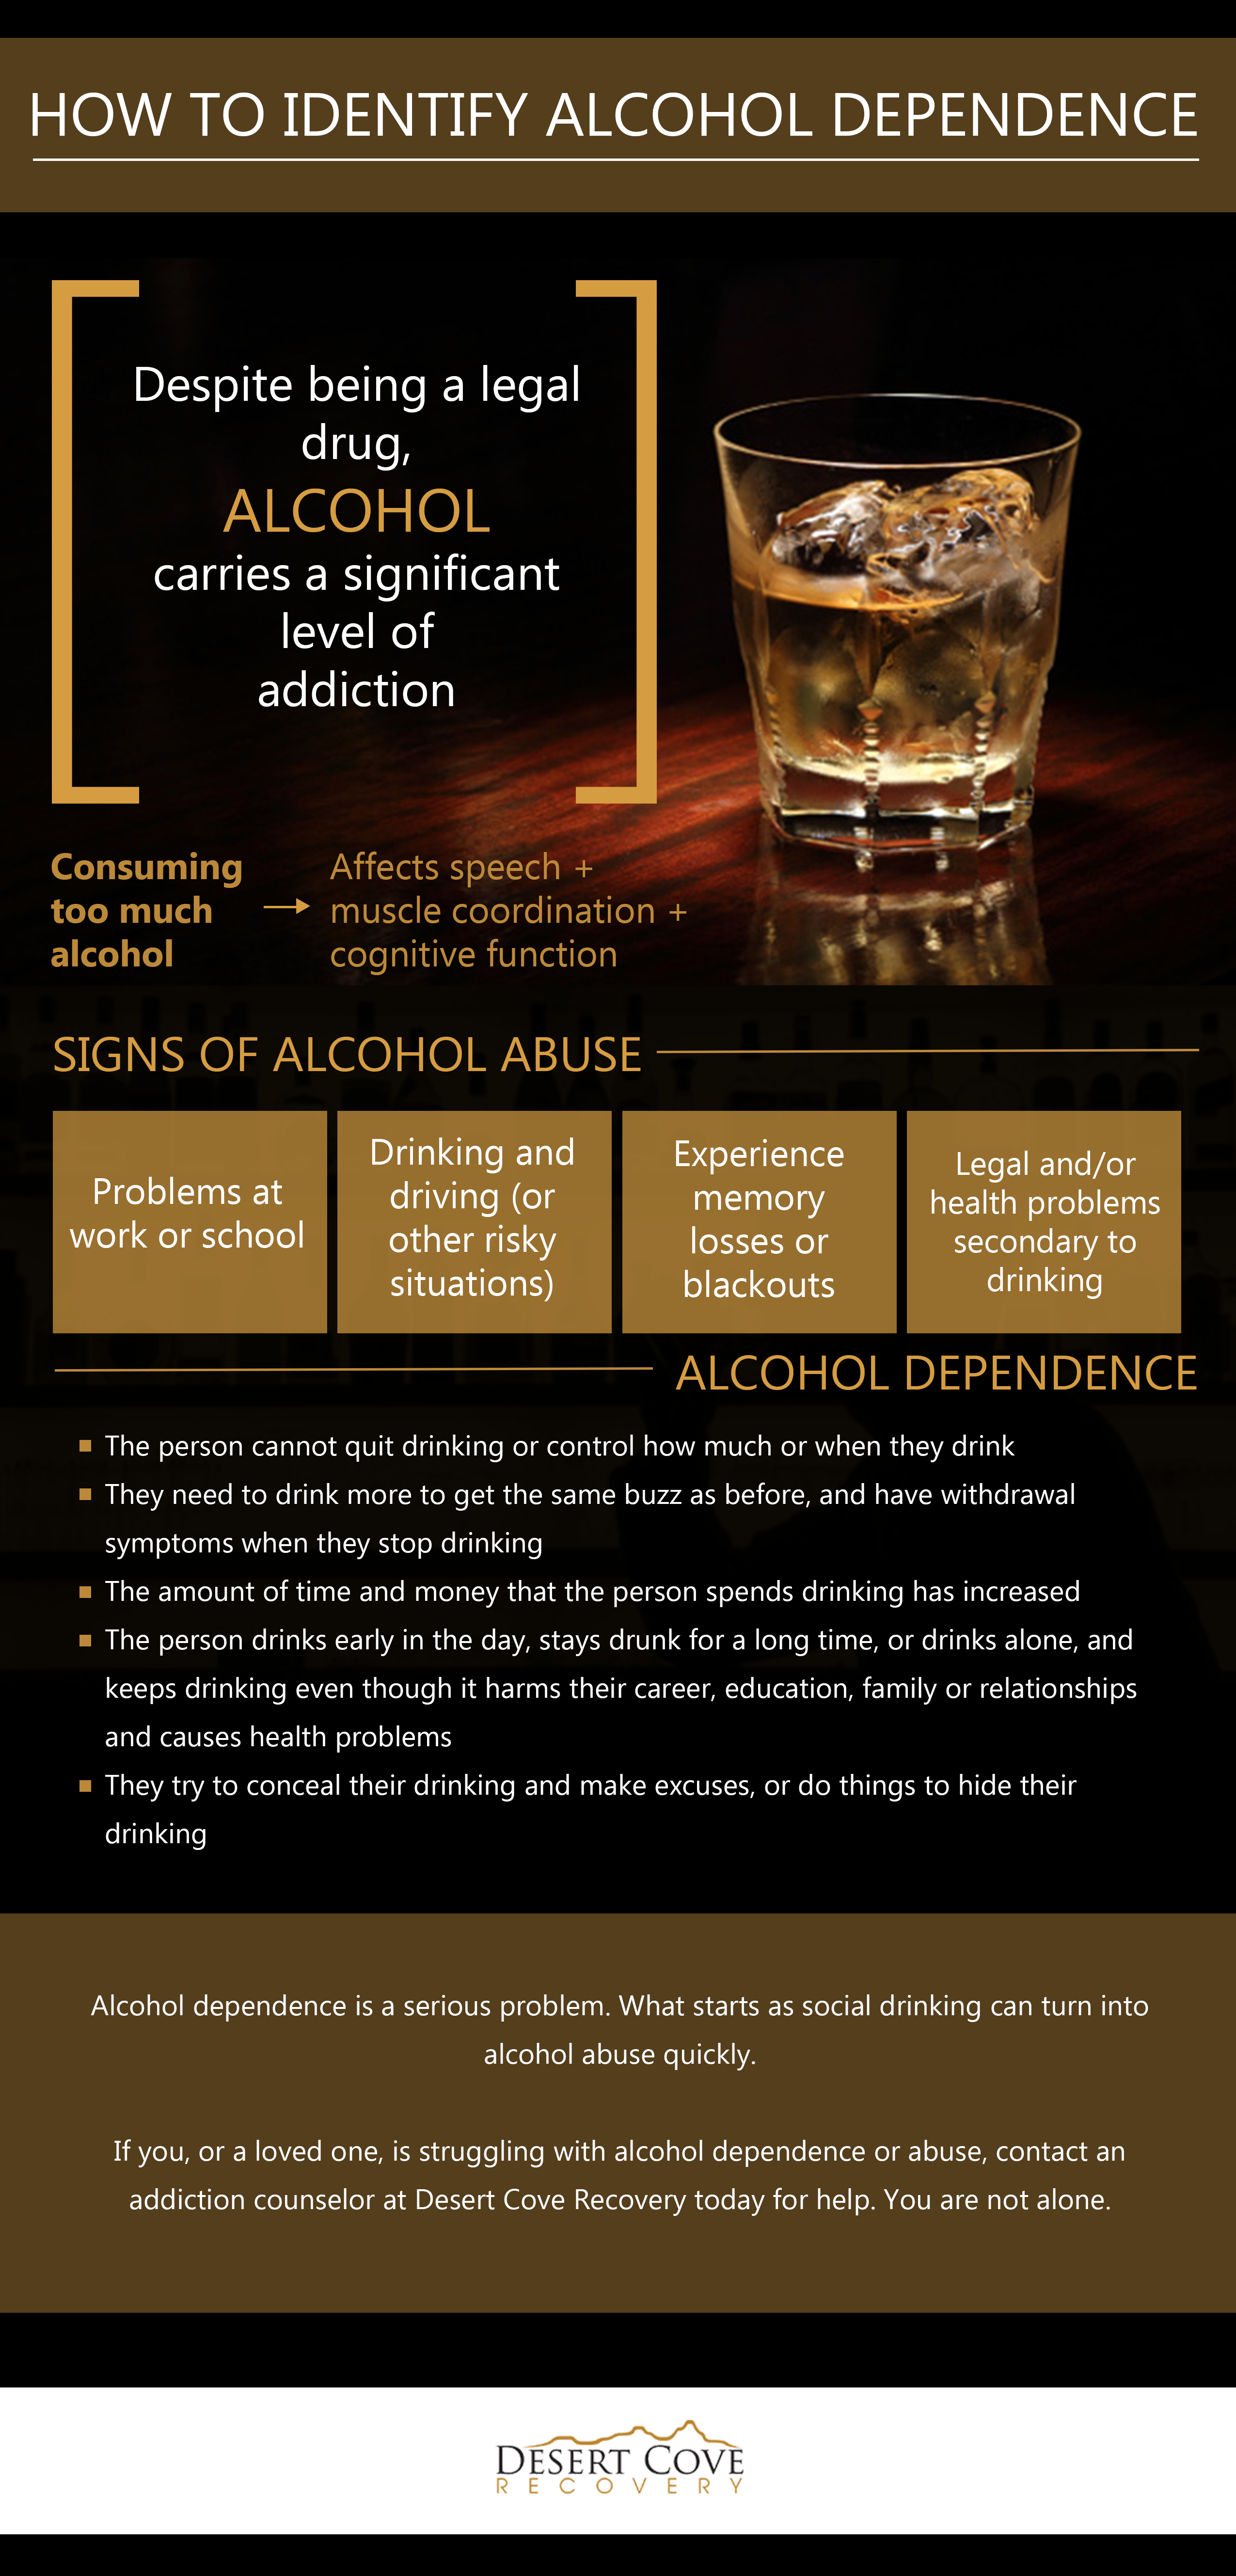 signs of alcoholism